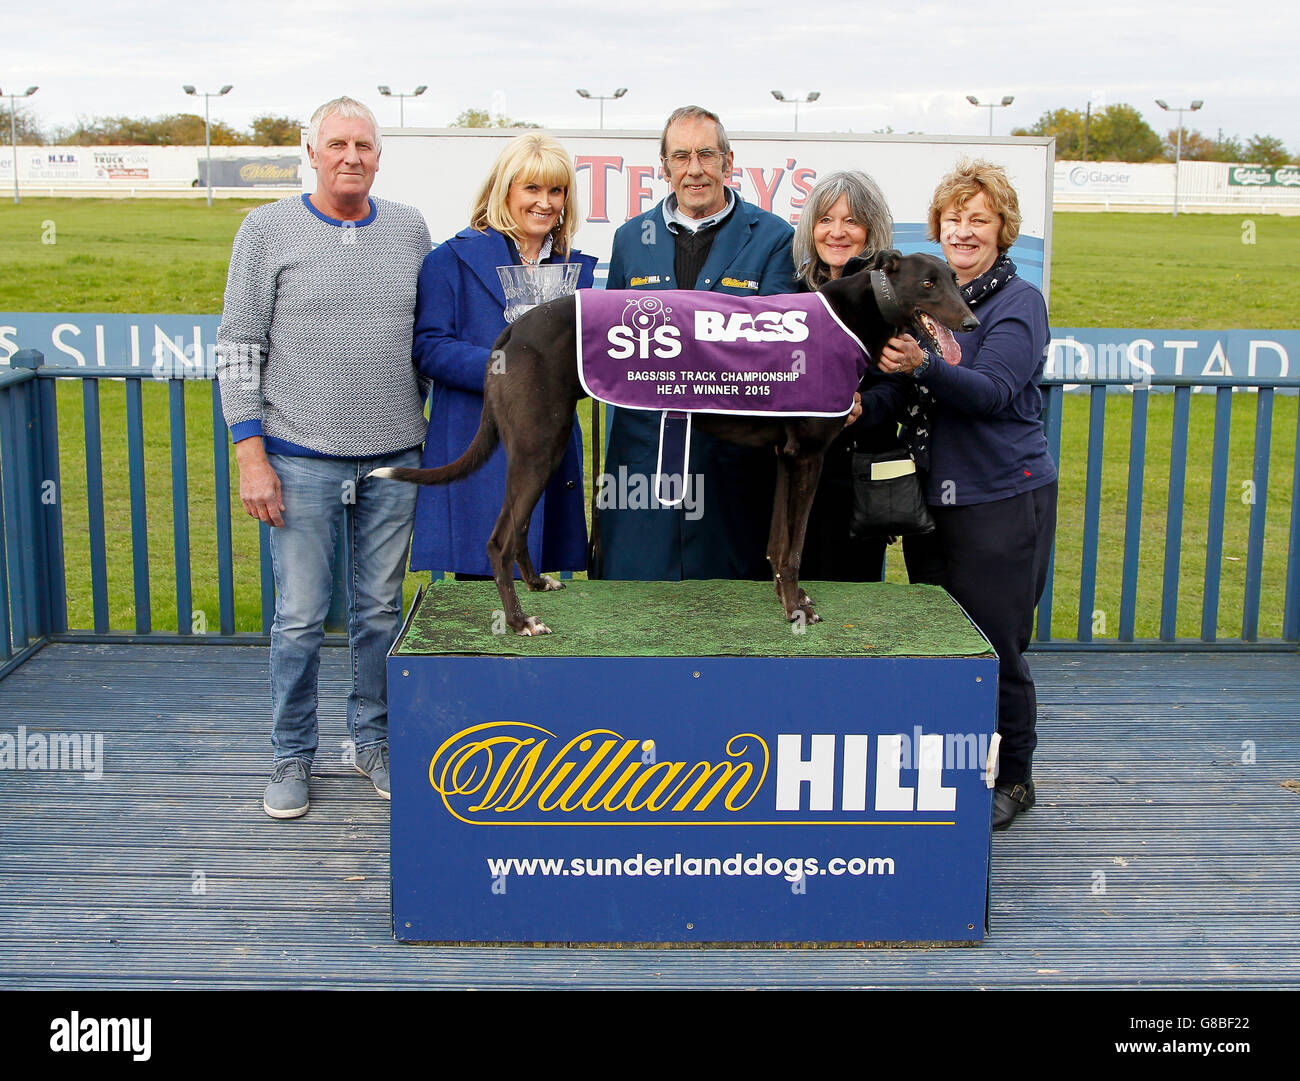 Holycrosskingman winner of the Bags Track Championship- Dogs with l to r, Ian Freeborne, Tracy Hunt, John Drake Anne Cross and Linda Pickles, AKA team Doncaster Stock Photo